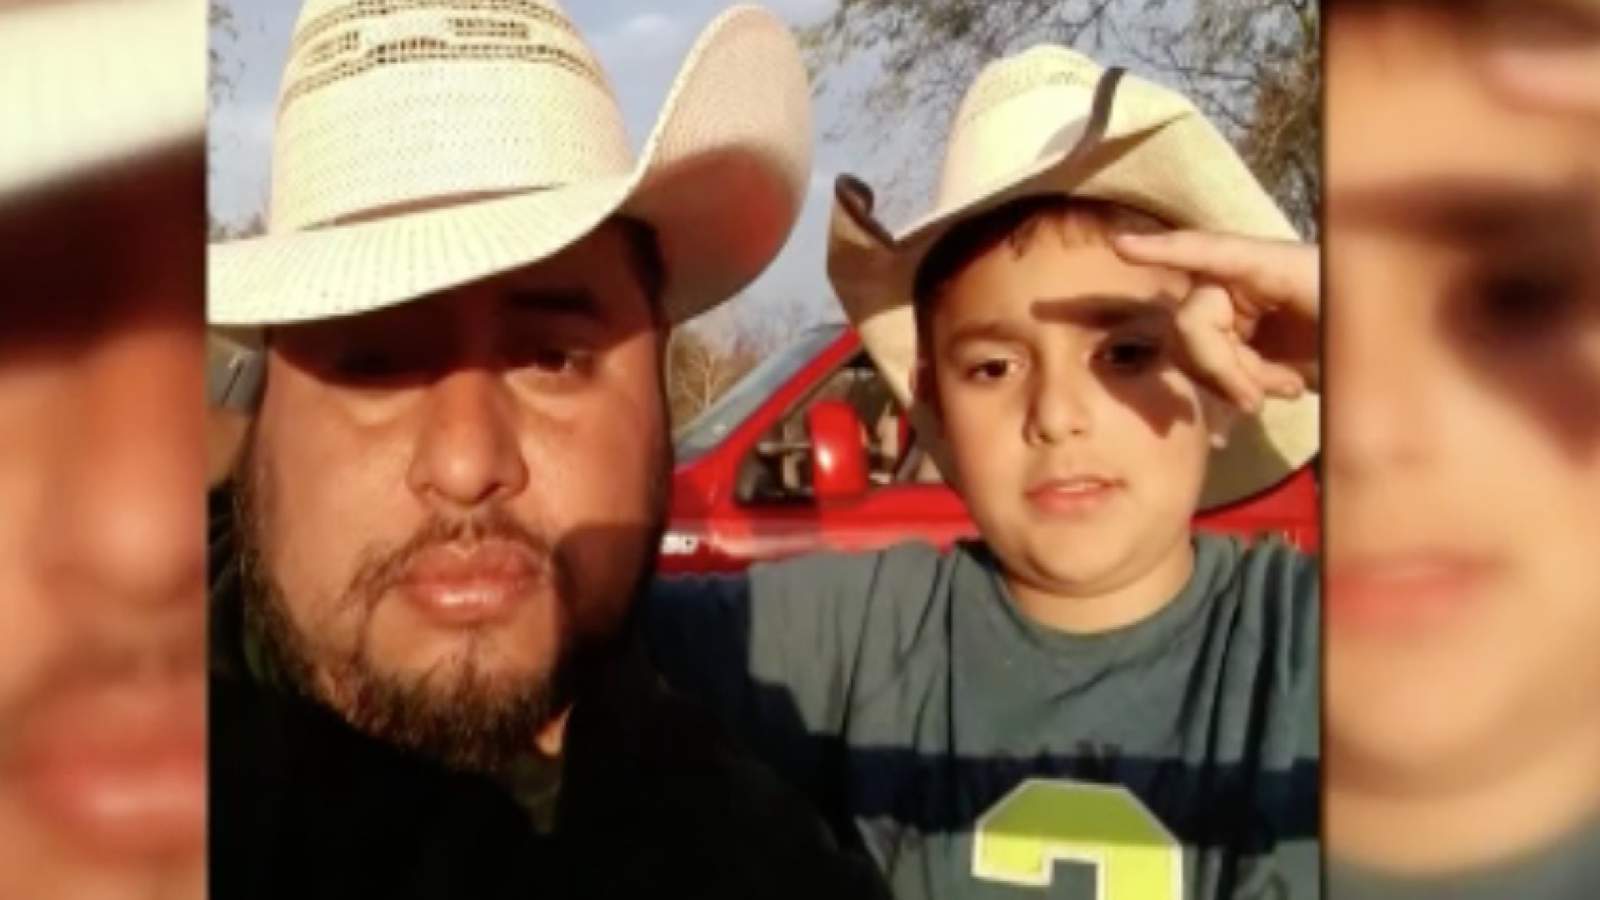 ‘I have to be the man of the house’: 11-year-old son remembers life of father killed by street racer